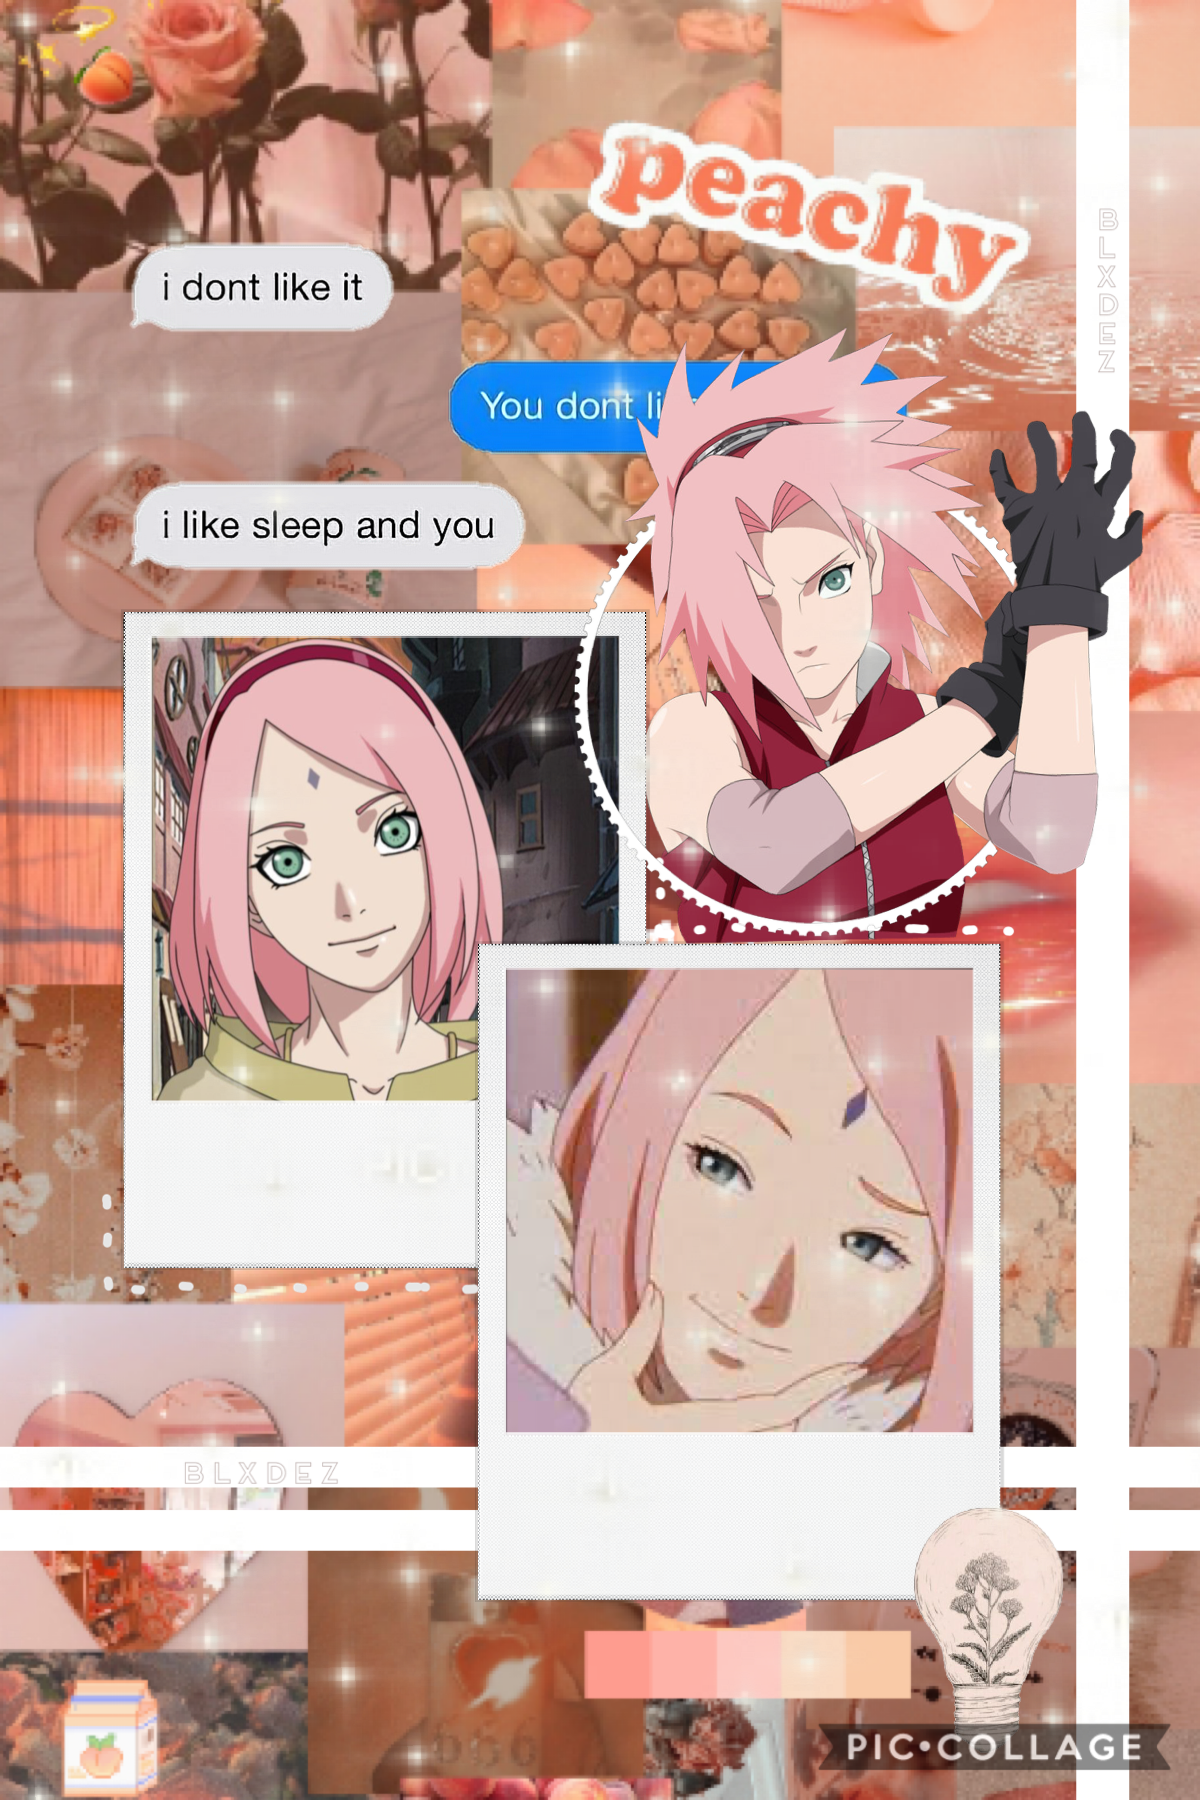 Sakura Haruno edit!
Anime: Naruto, Naruto Shippuden, Naruto: The last, Naruto Shippuden, Boruto —> with Sakura
She’s sweet, can be annoying, at first she was very weak, in the end pain made her stronger =)